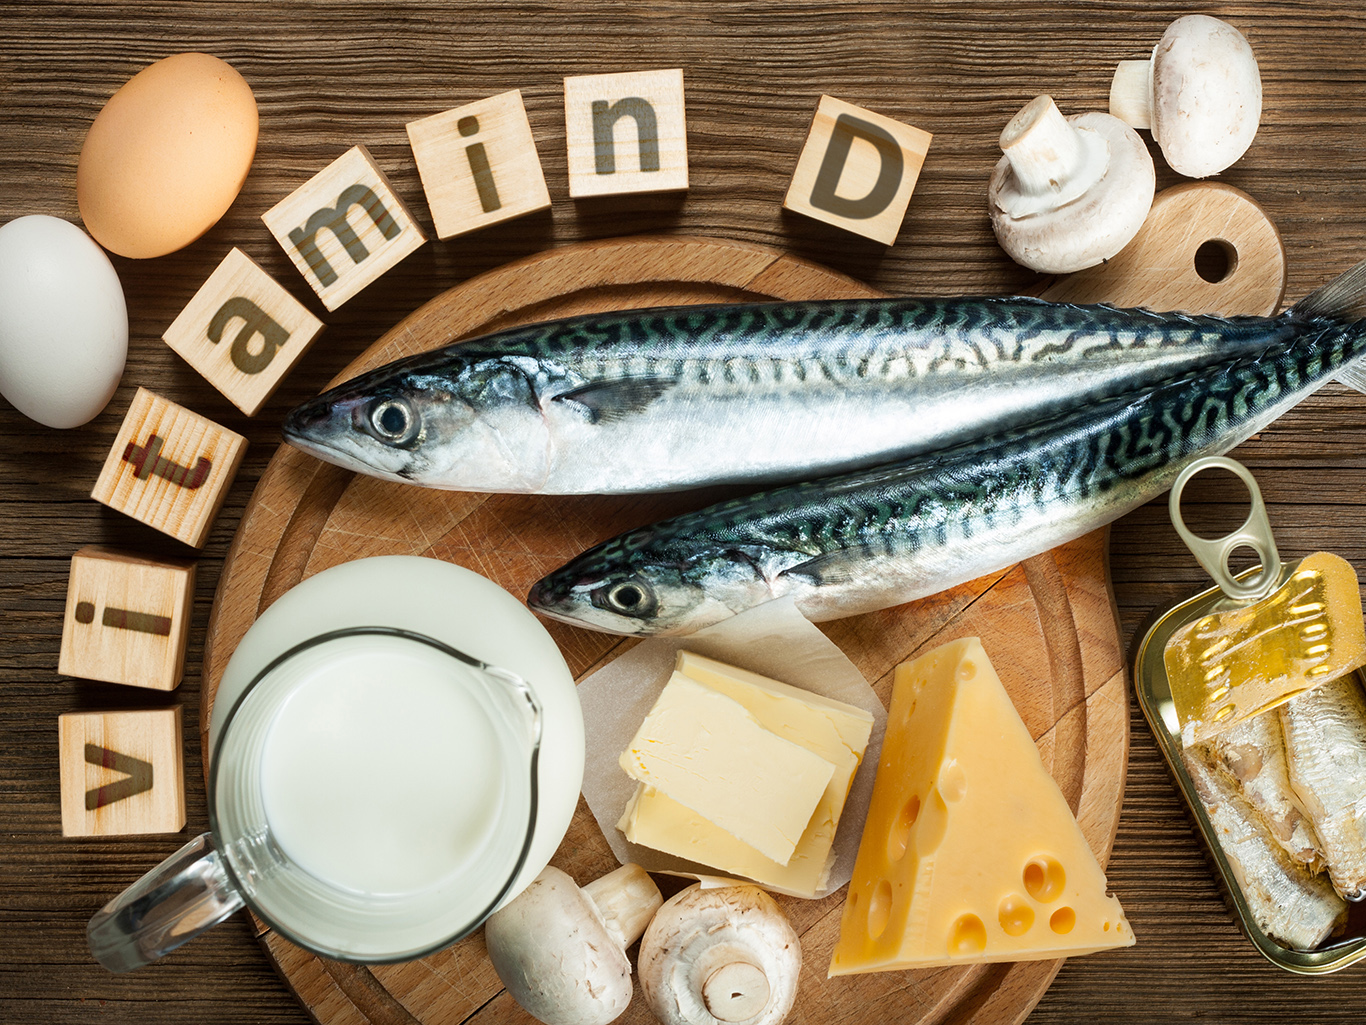 Facts about Vitamin D